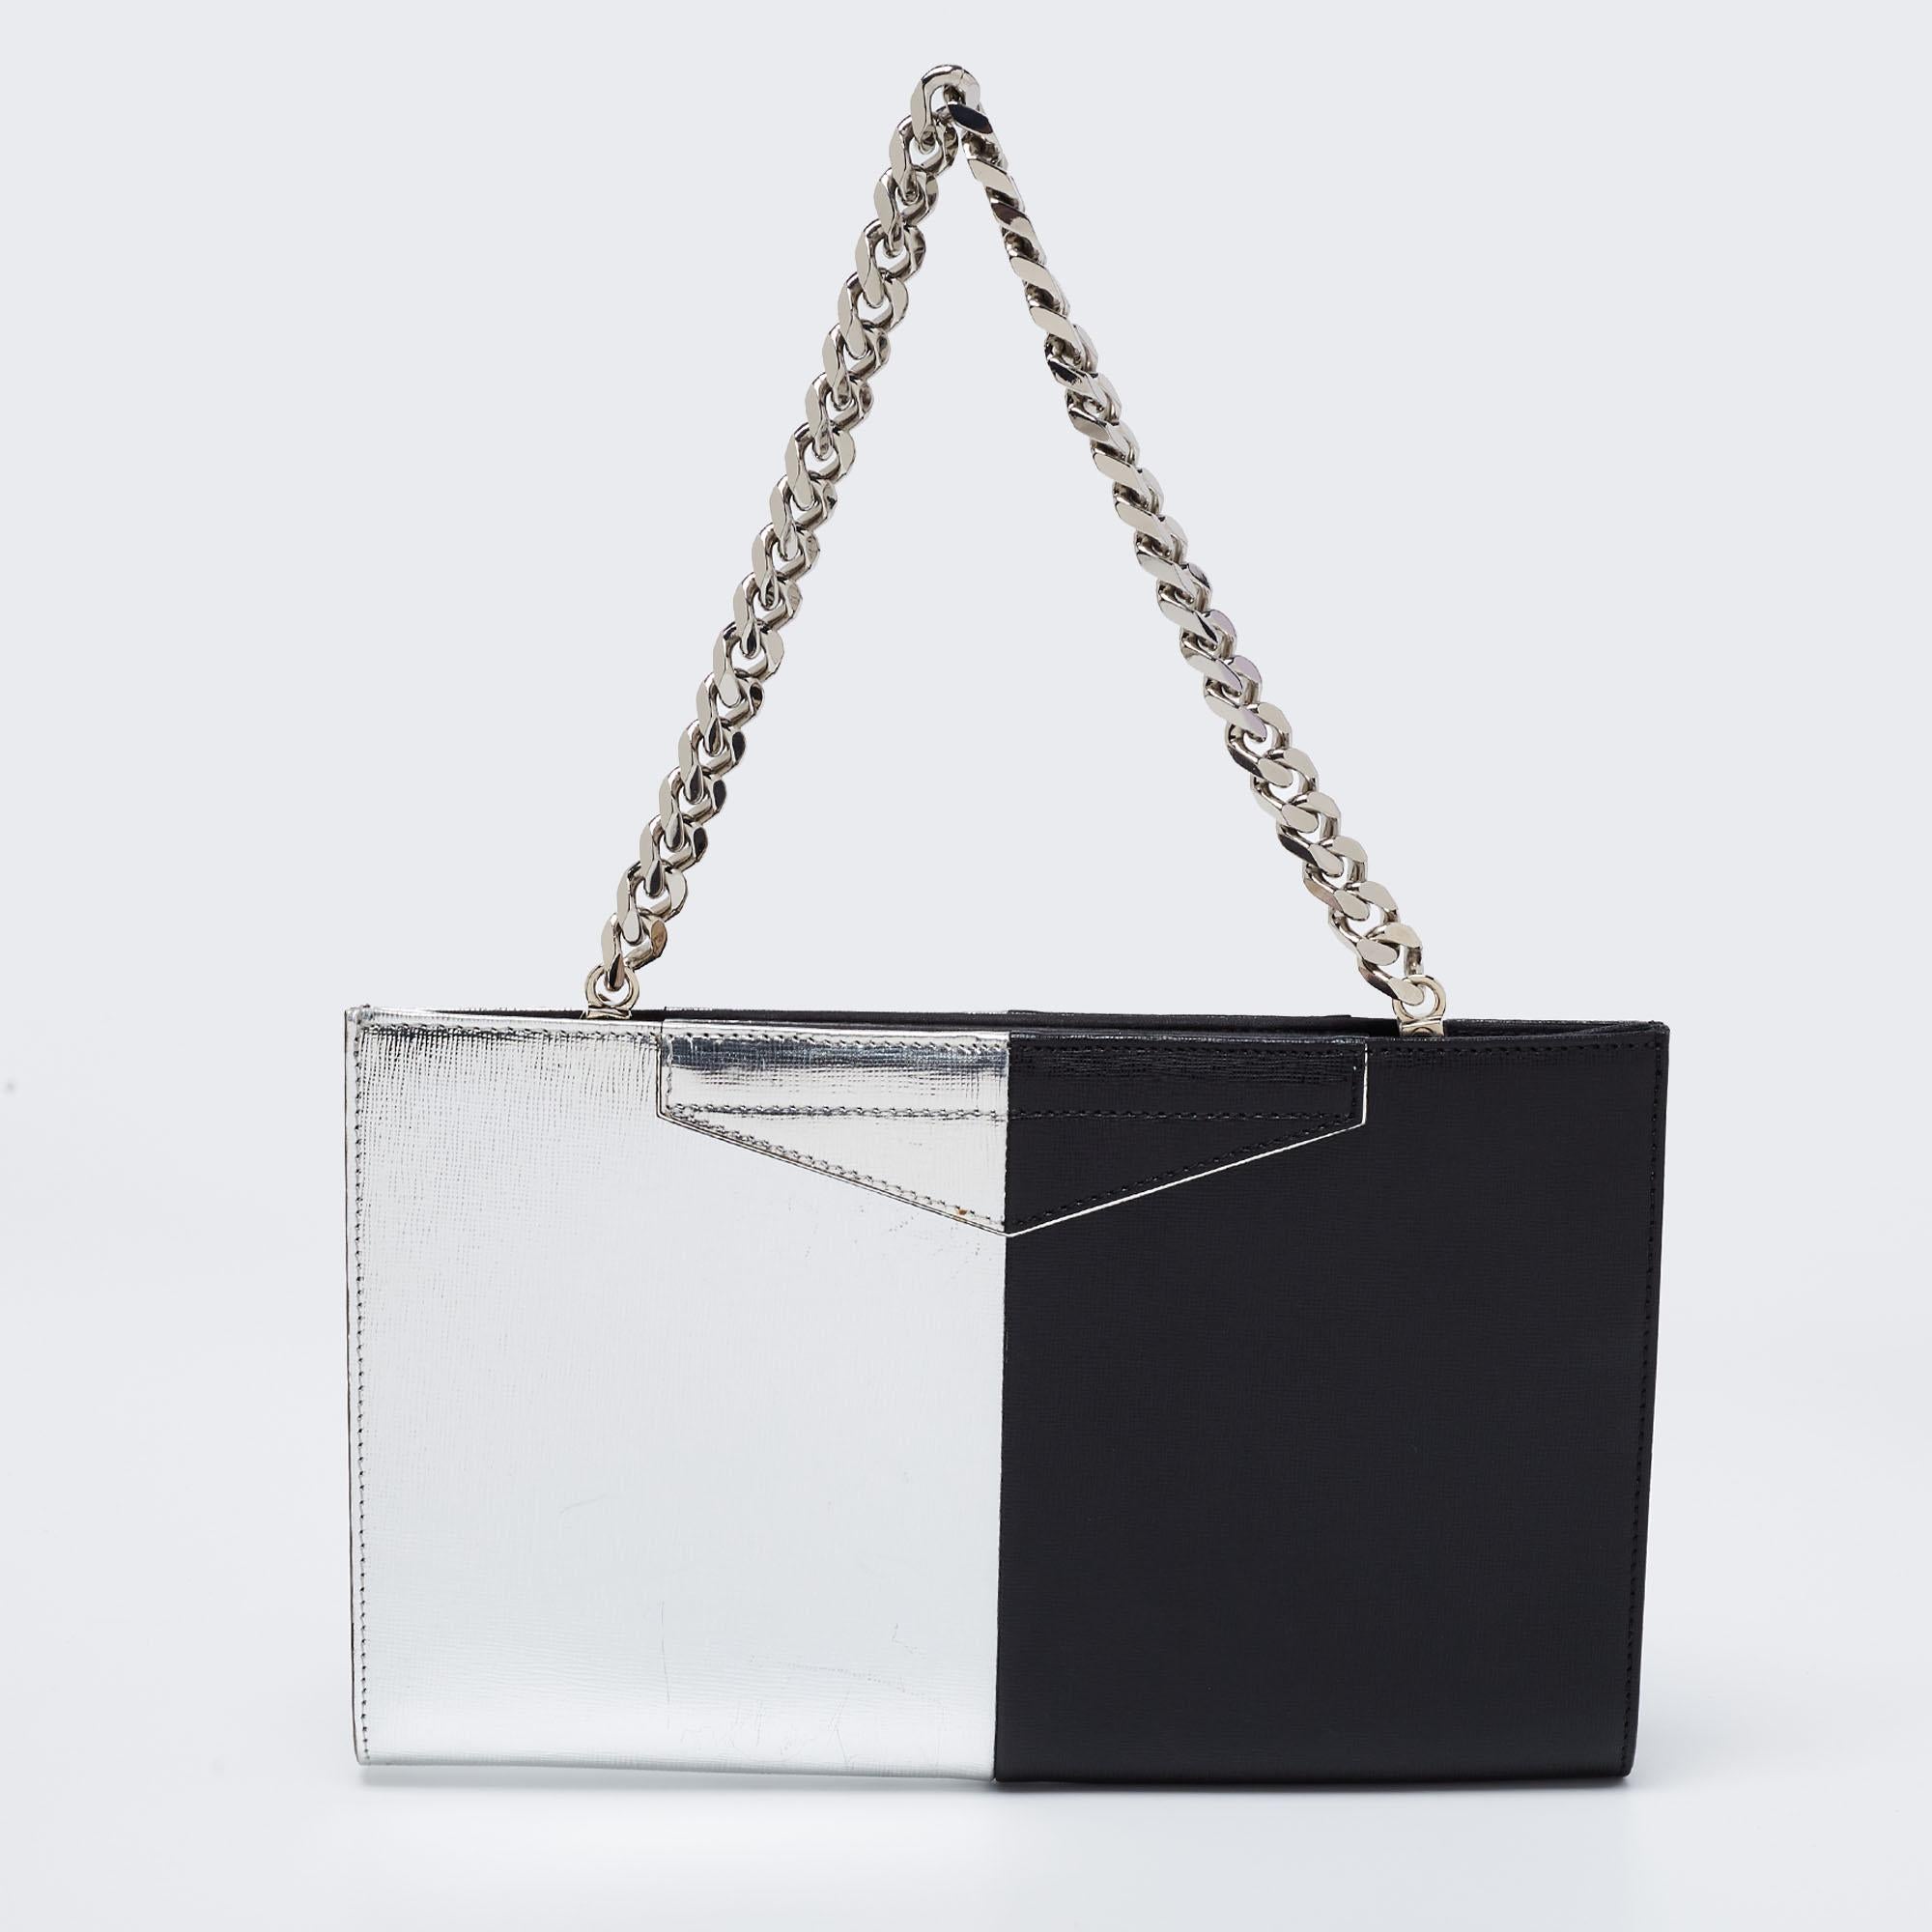 This clutch from Fendi has an appealing design, perfect to complement an evening dress or a day ensemble. Crafted from black & silver leather, the creation has a rectangular shape with a chain on top.

Includes: Original Dustbag, Info Booklet
